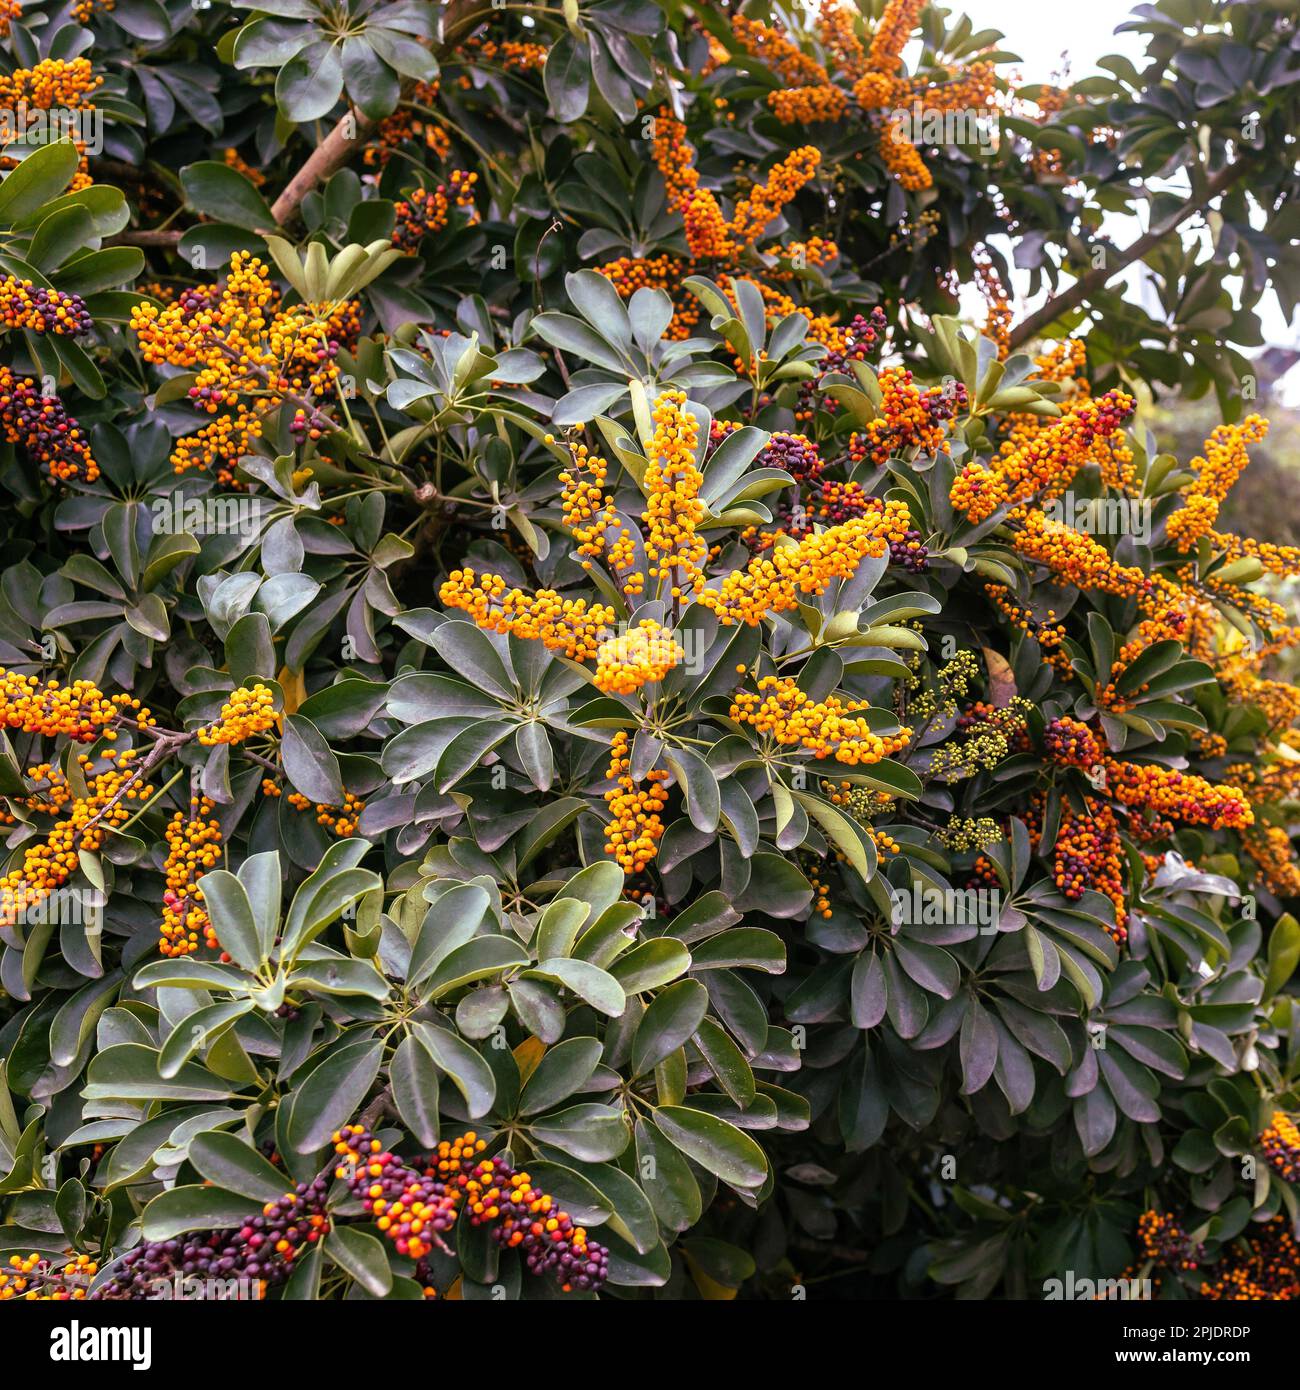 Flora of Israel. Square frame. Schefflera bloom showcases array of berries Stock Photo